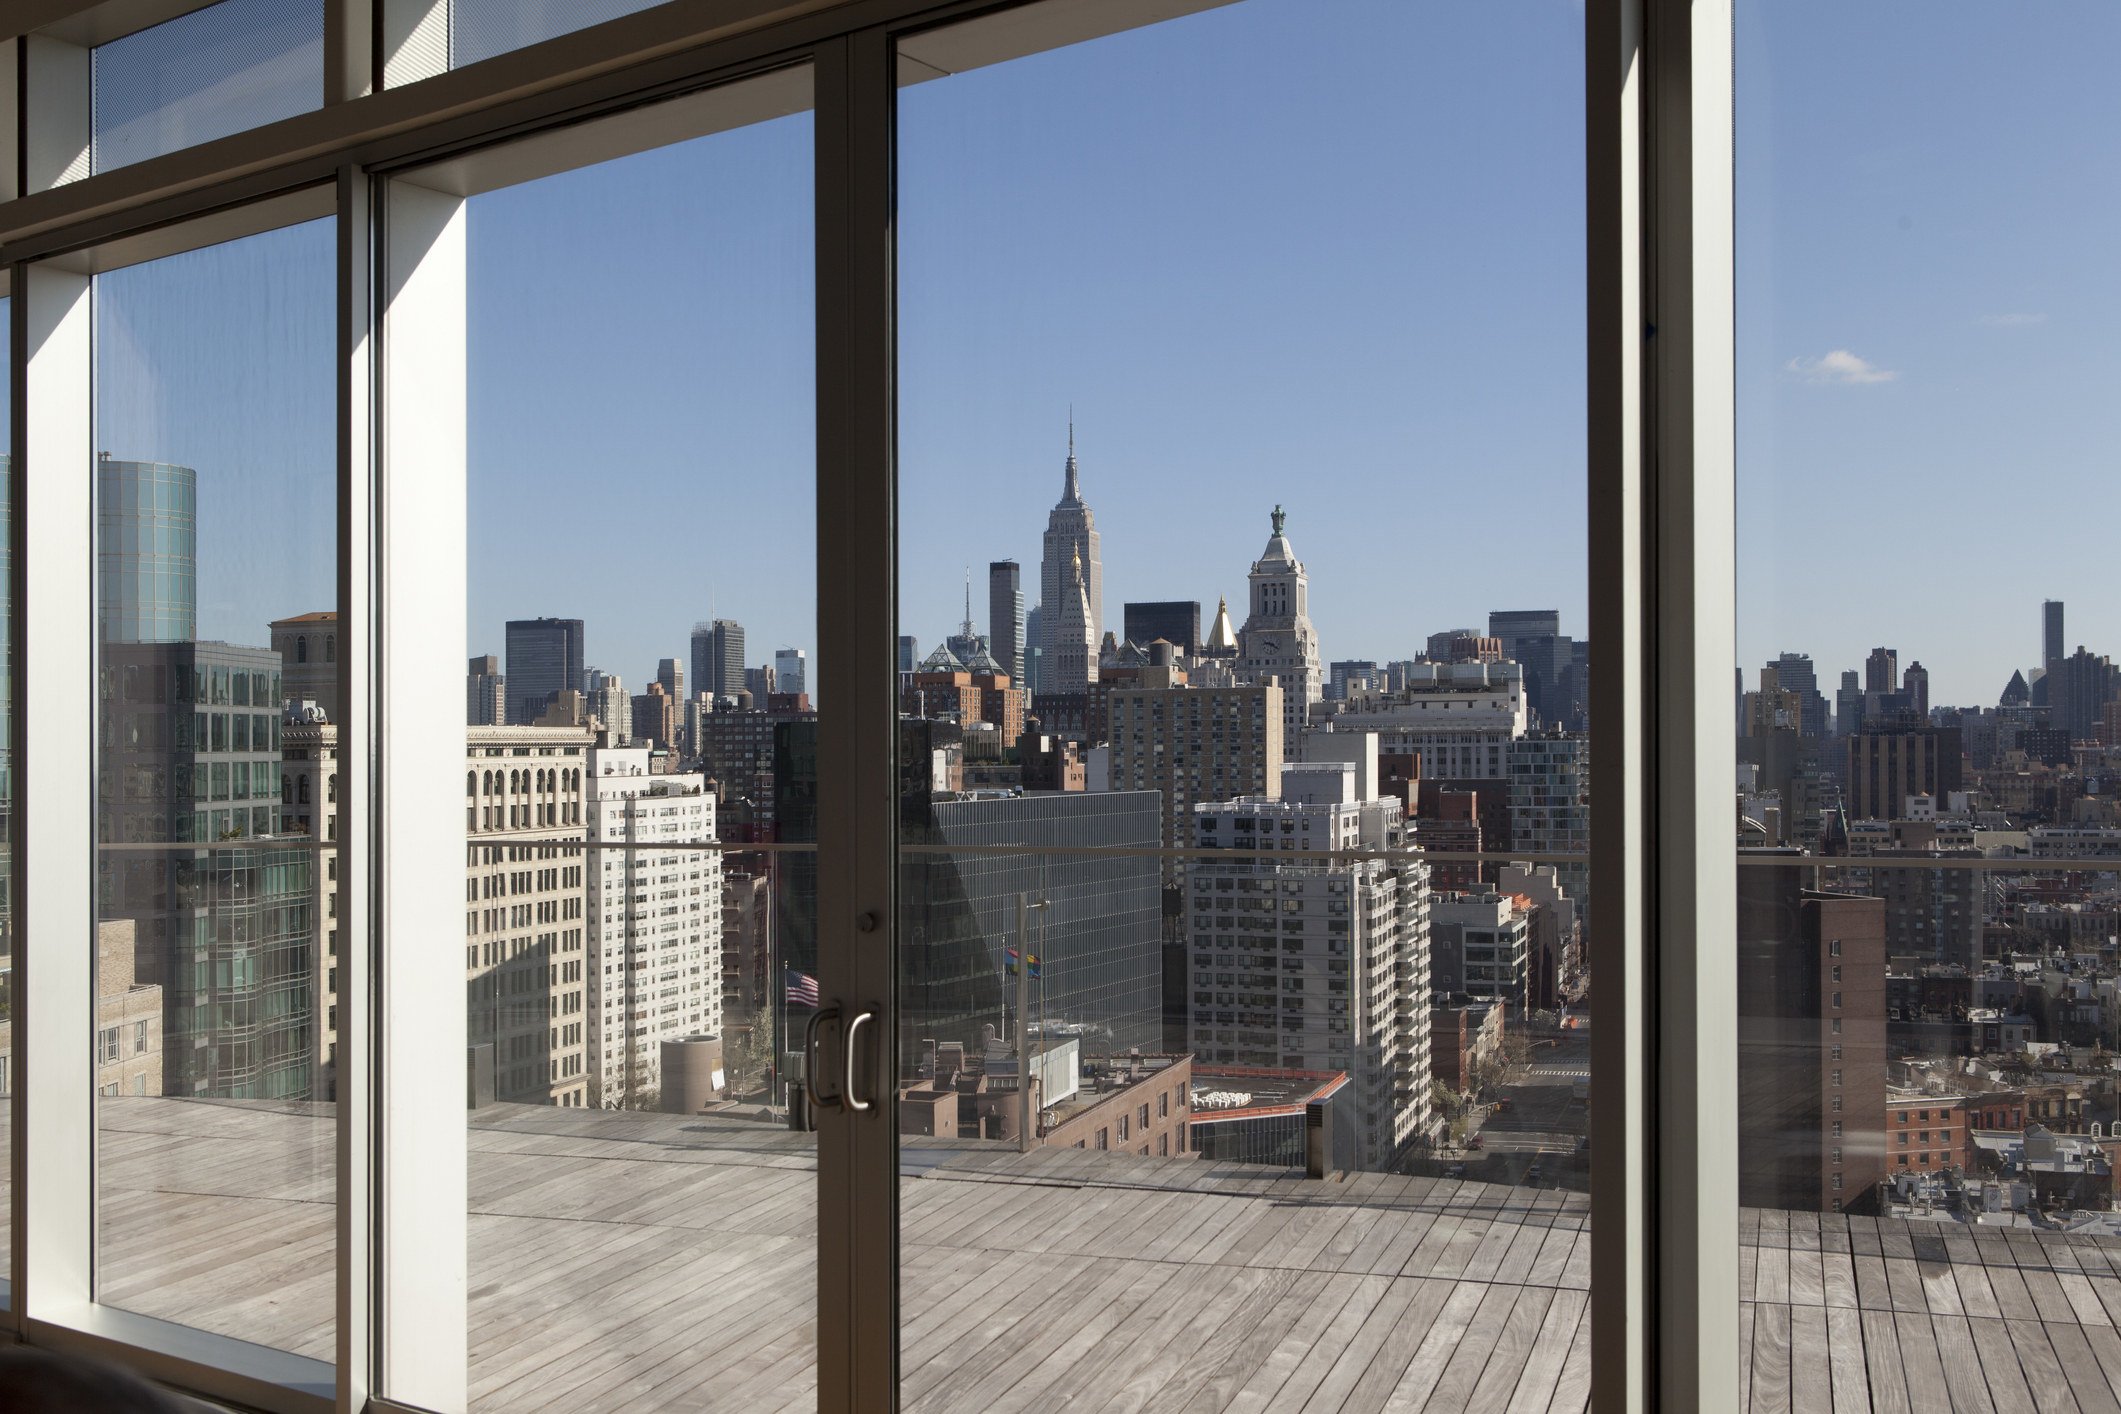 A view of the New York skyline through the floor-to-ceiling windows of an apartment